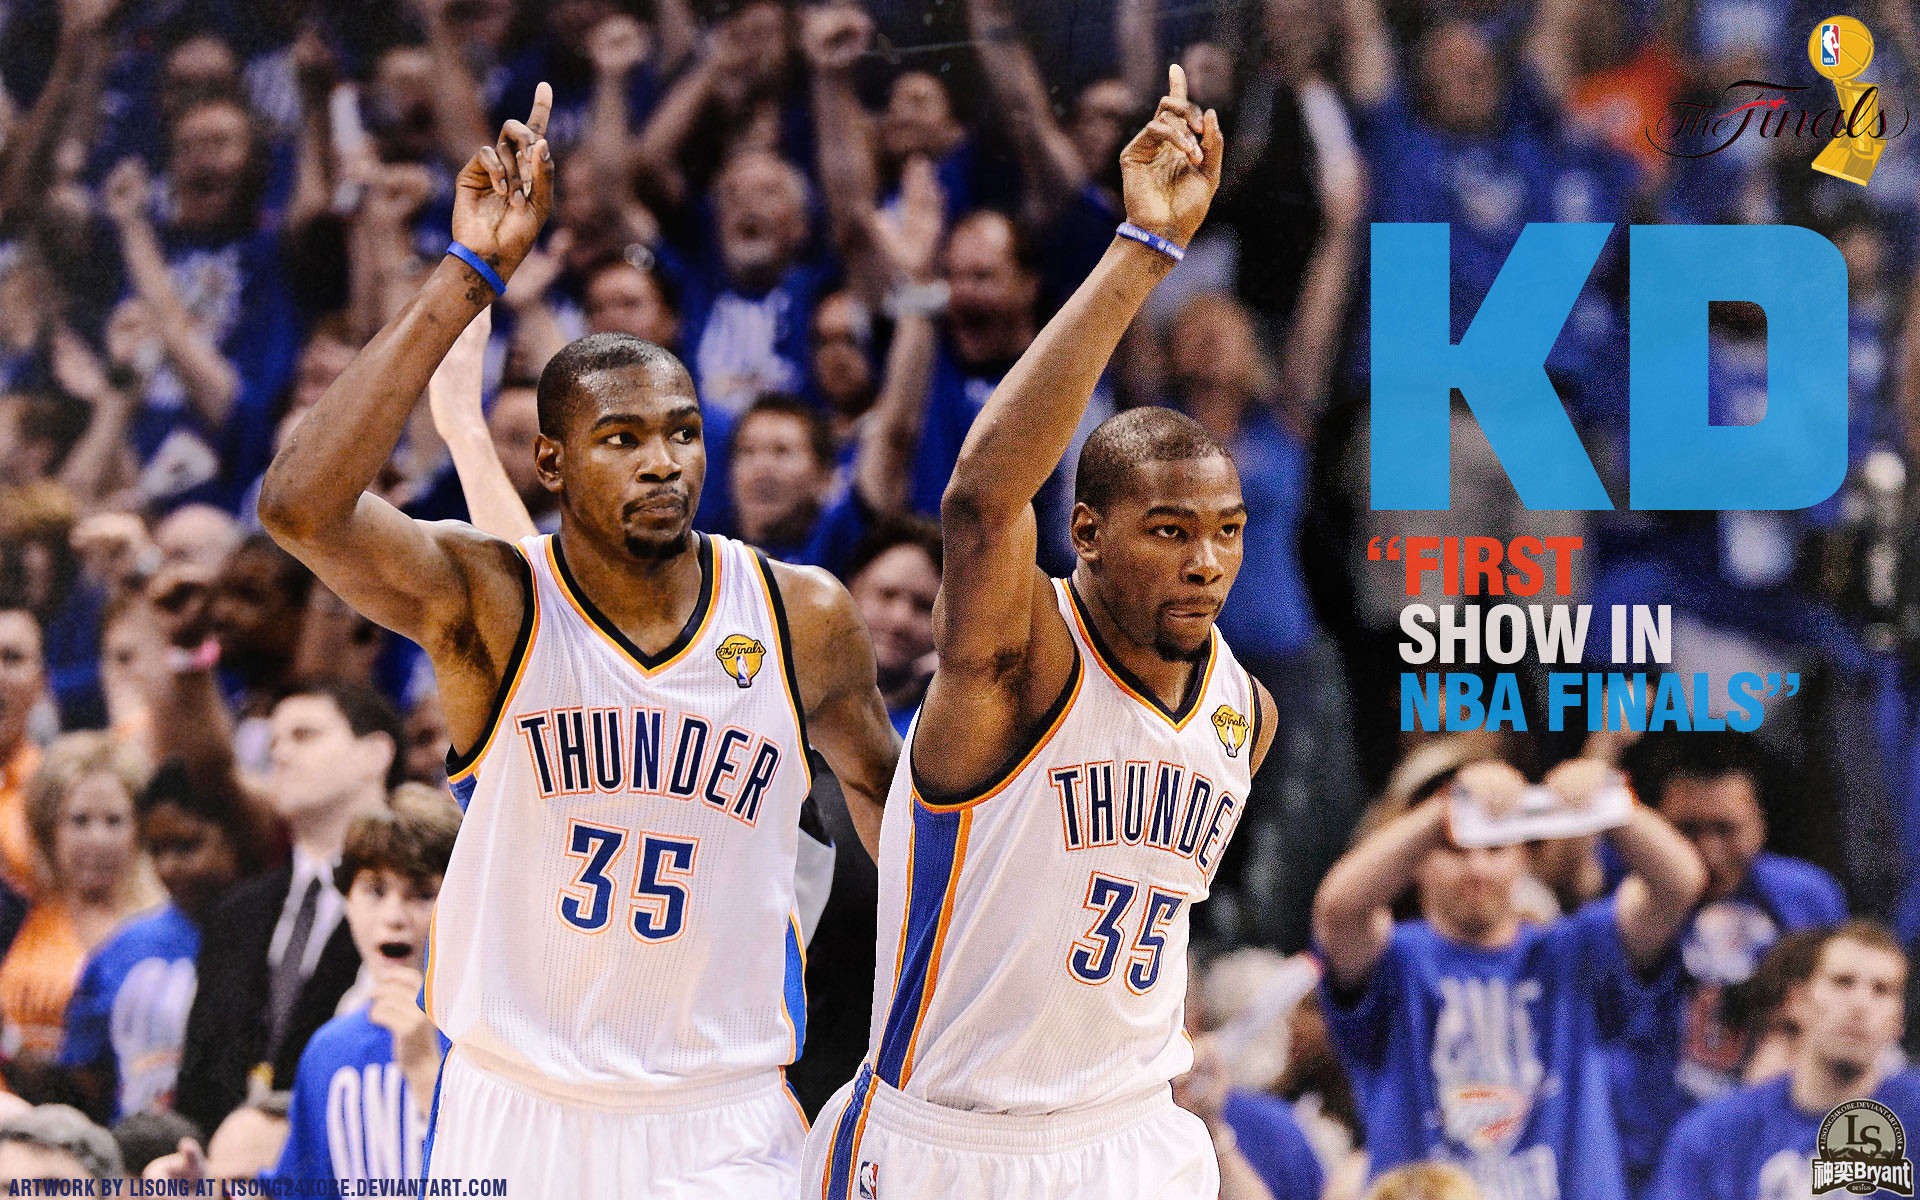 Kevin Durant And Russell Westbrook HD Wallpapers 4 Kevin Durant And Russell Westbrook HD Wallpapers Pinterest Russell westbrook, Kevin durant and Nba